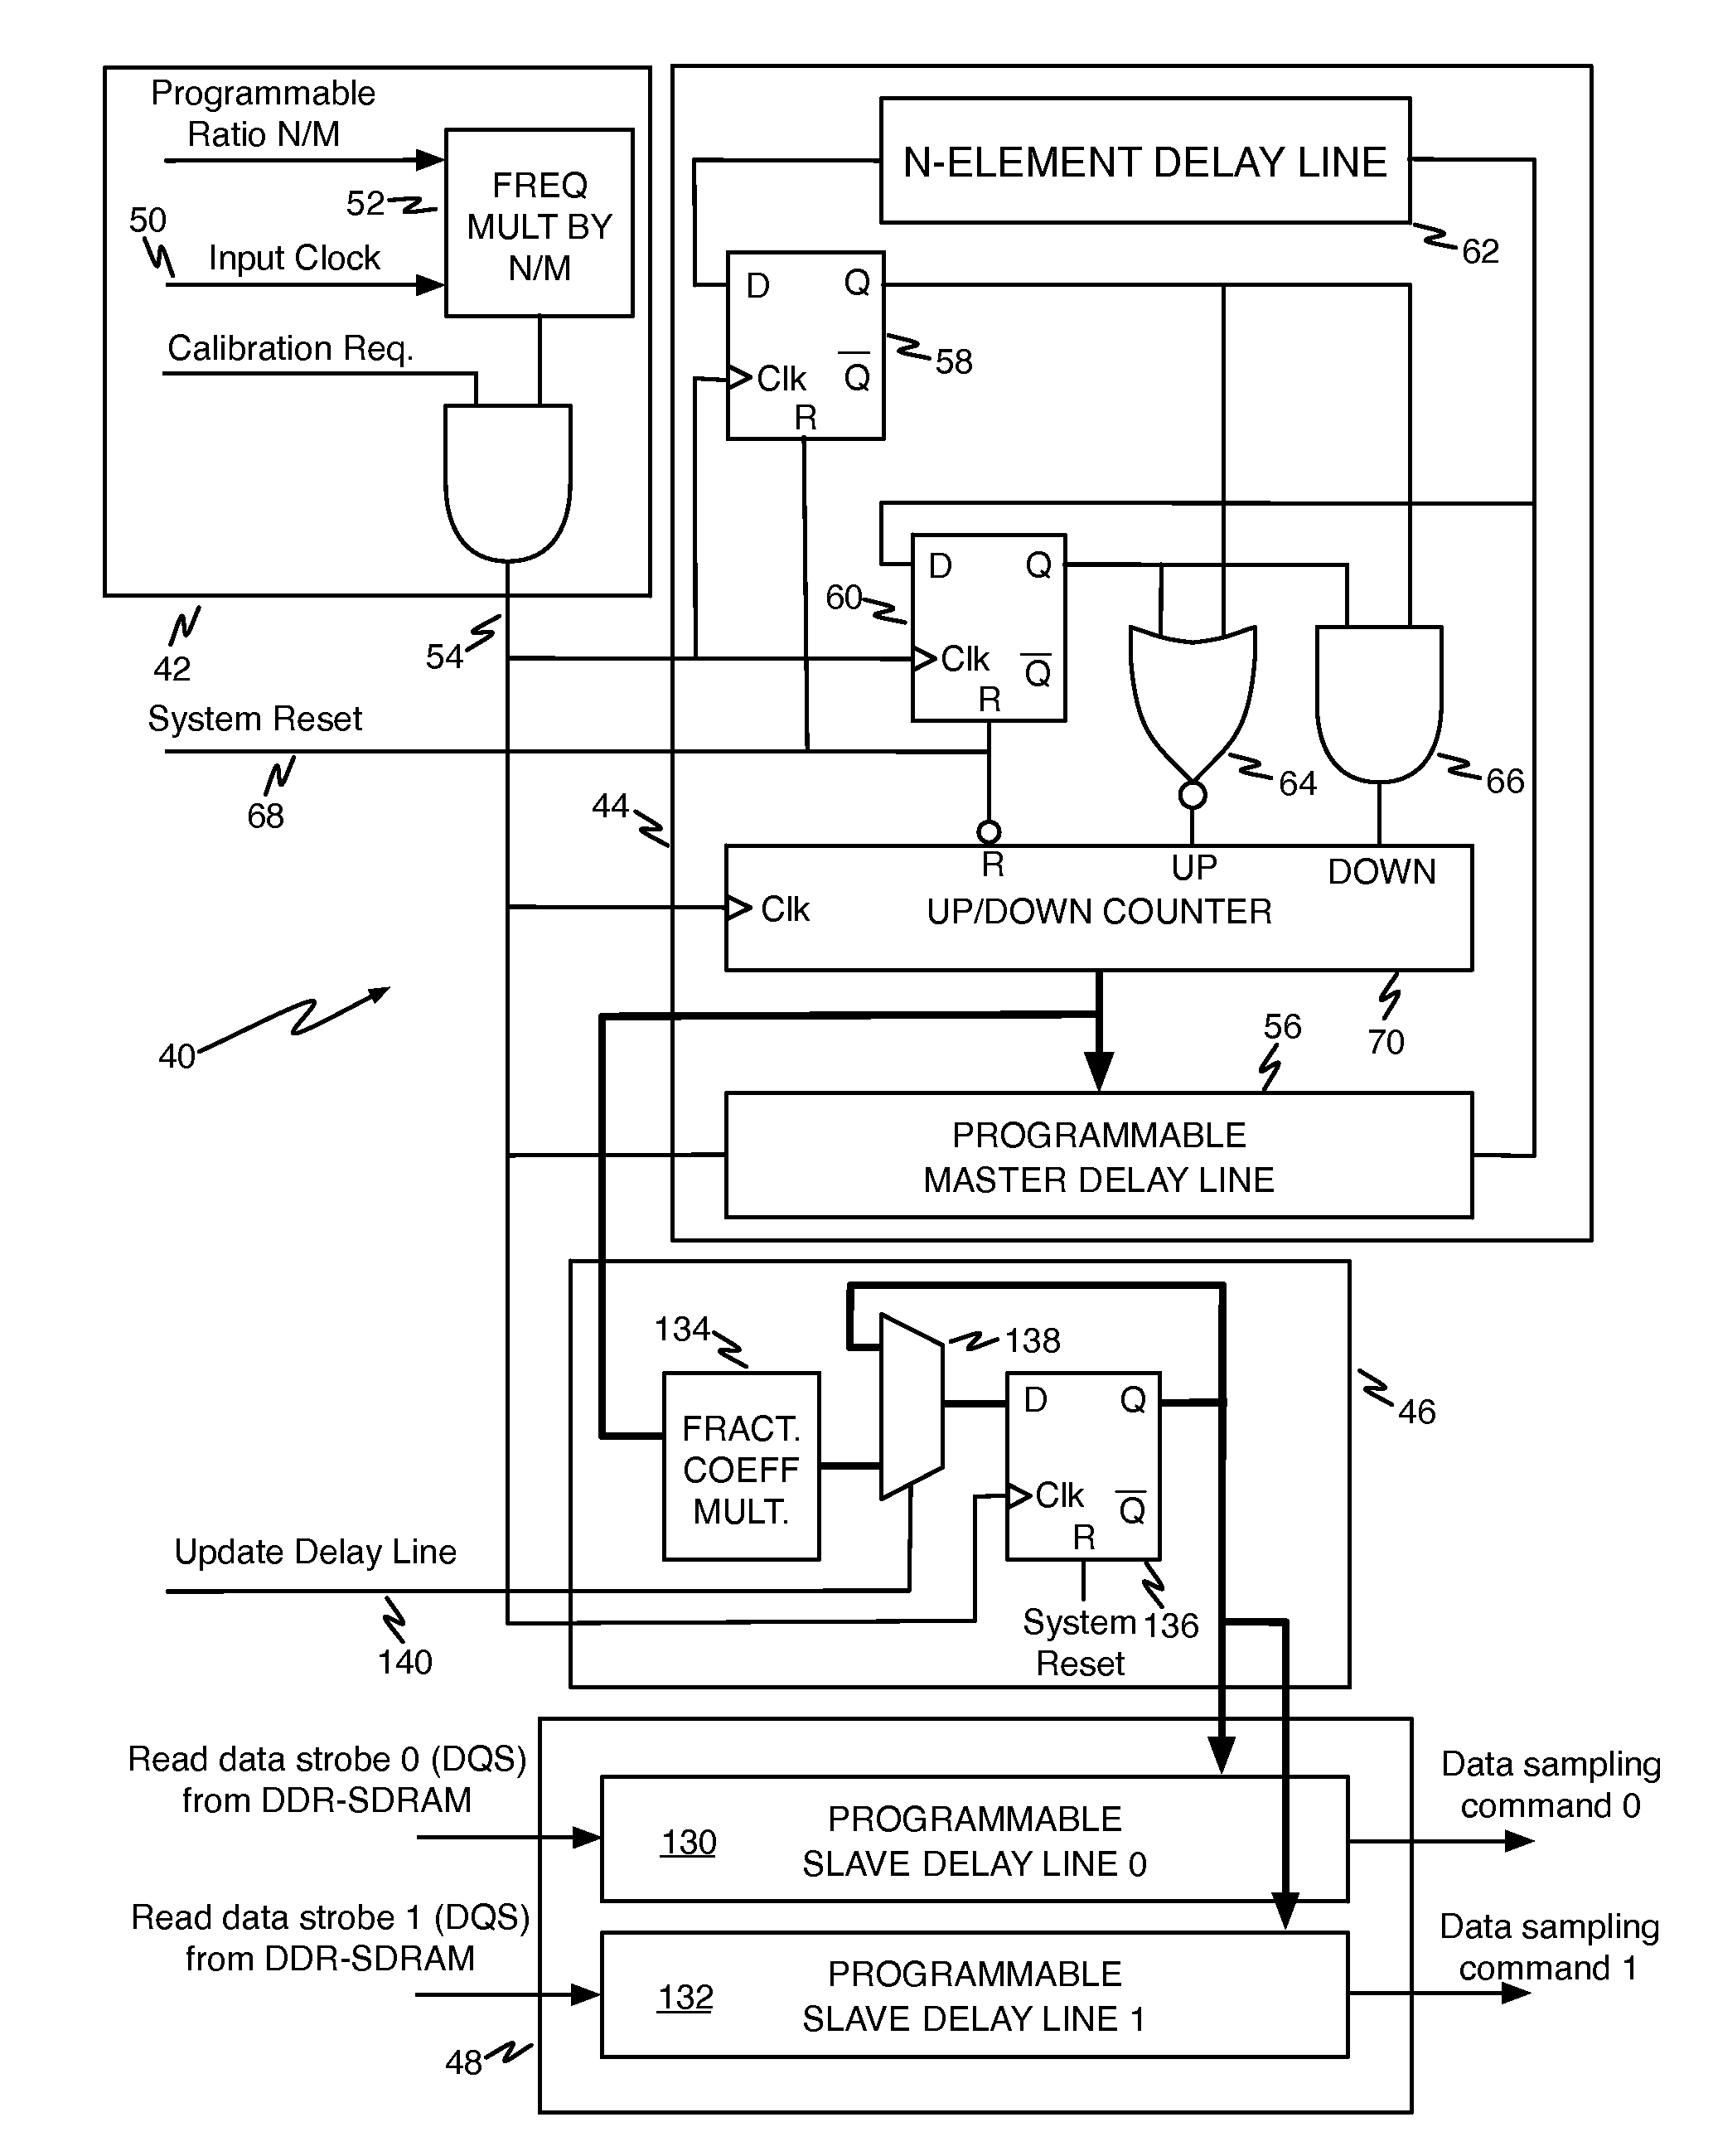 Circuits to delay a signal from DDR-SDRAM memory device including an automatic phase error correction